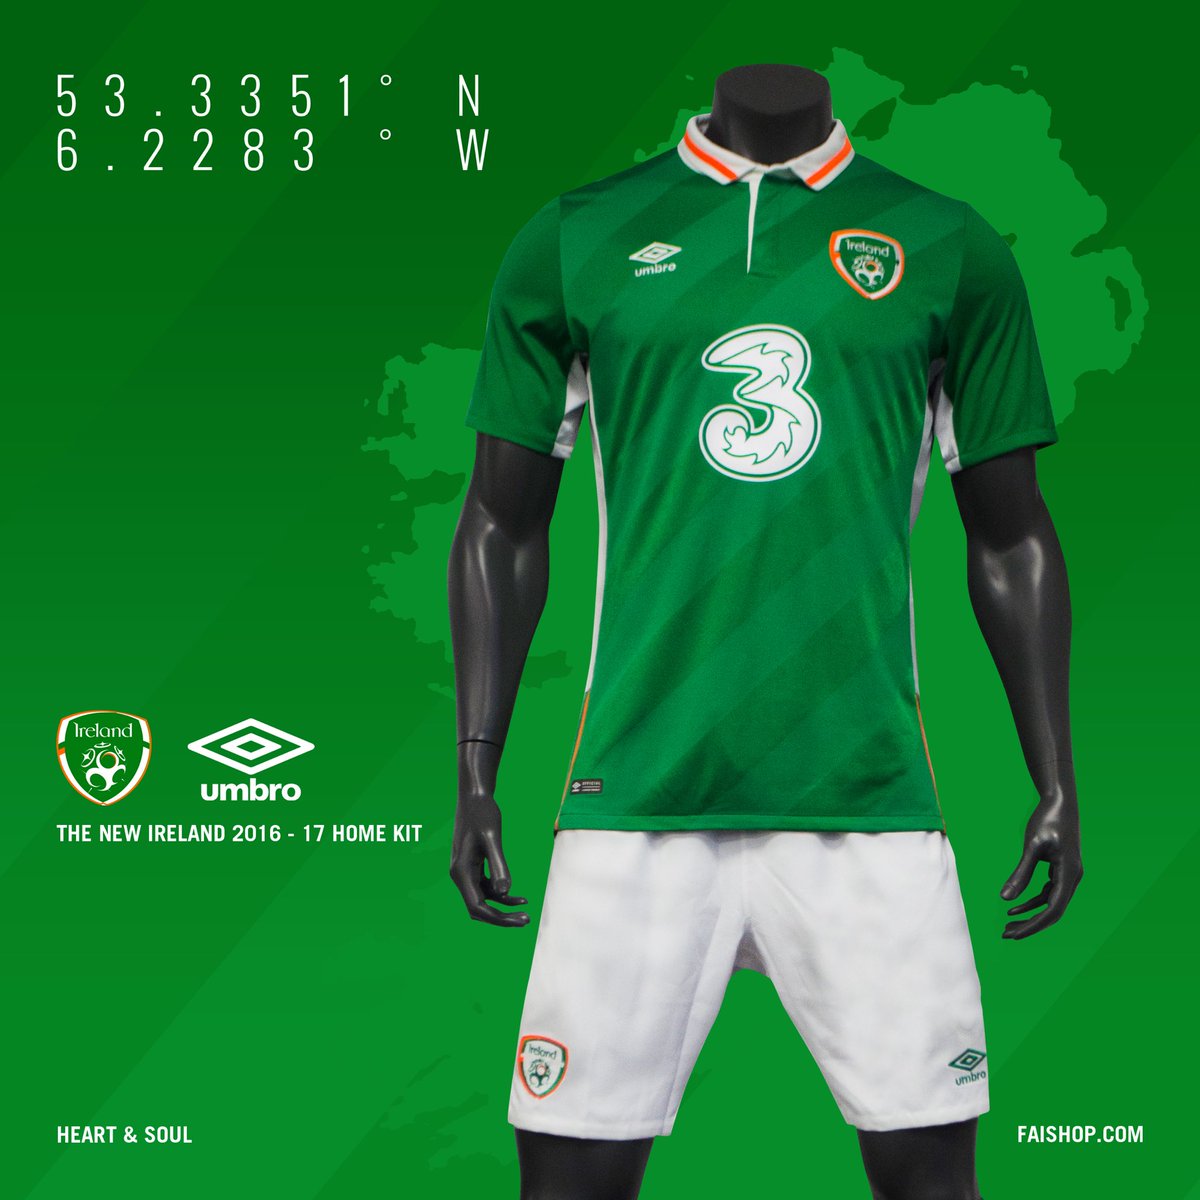 For a chance to WIN the new @faiireland @umbro jersey just RT this photo! Winners announcd here @ 5pm on Monday 😉☘🇮🇪